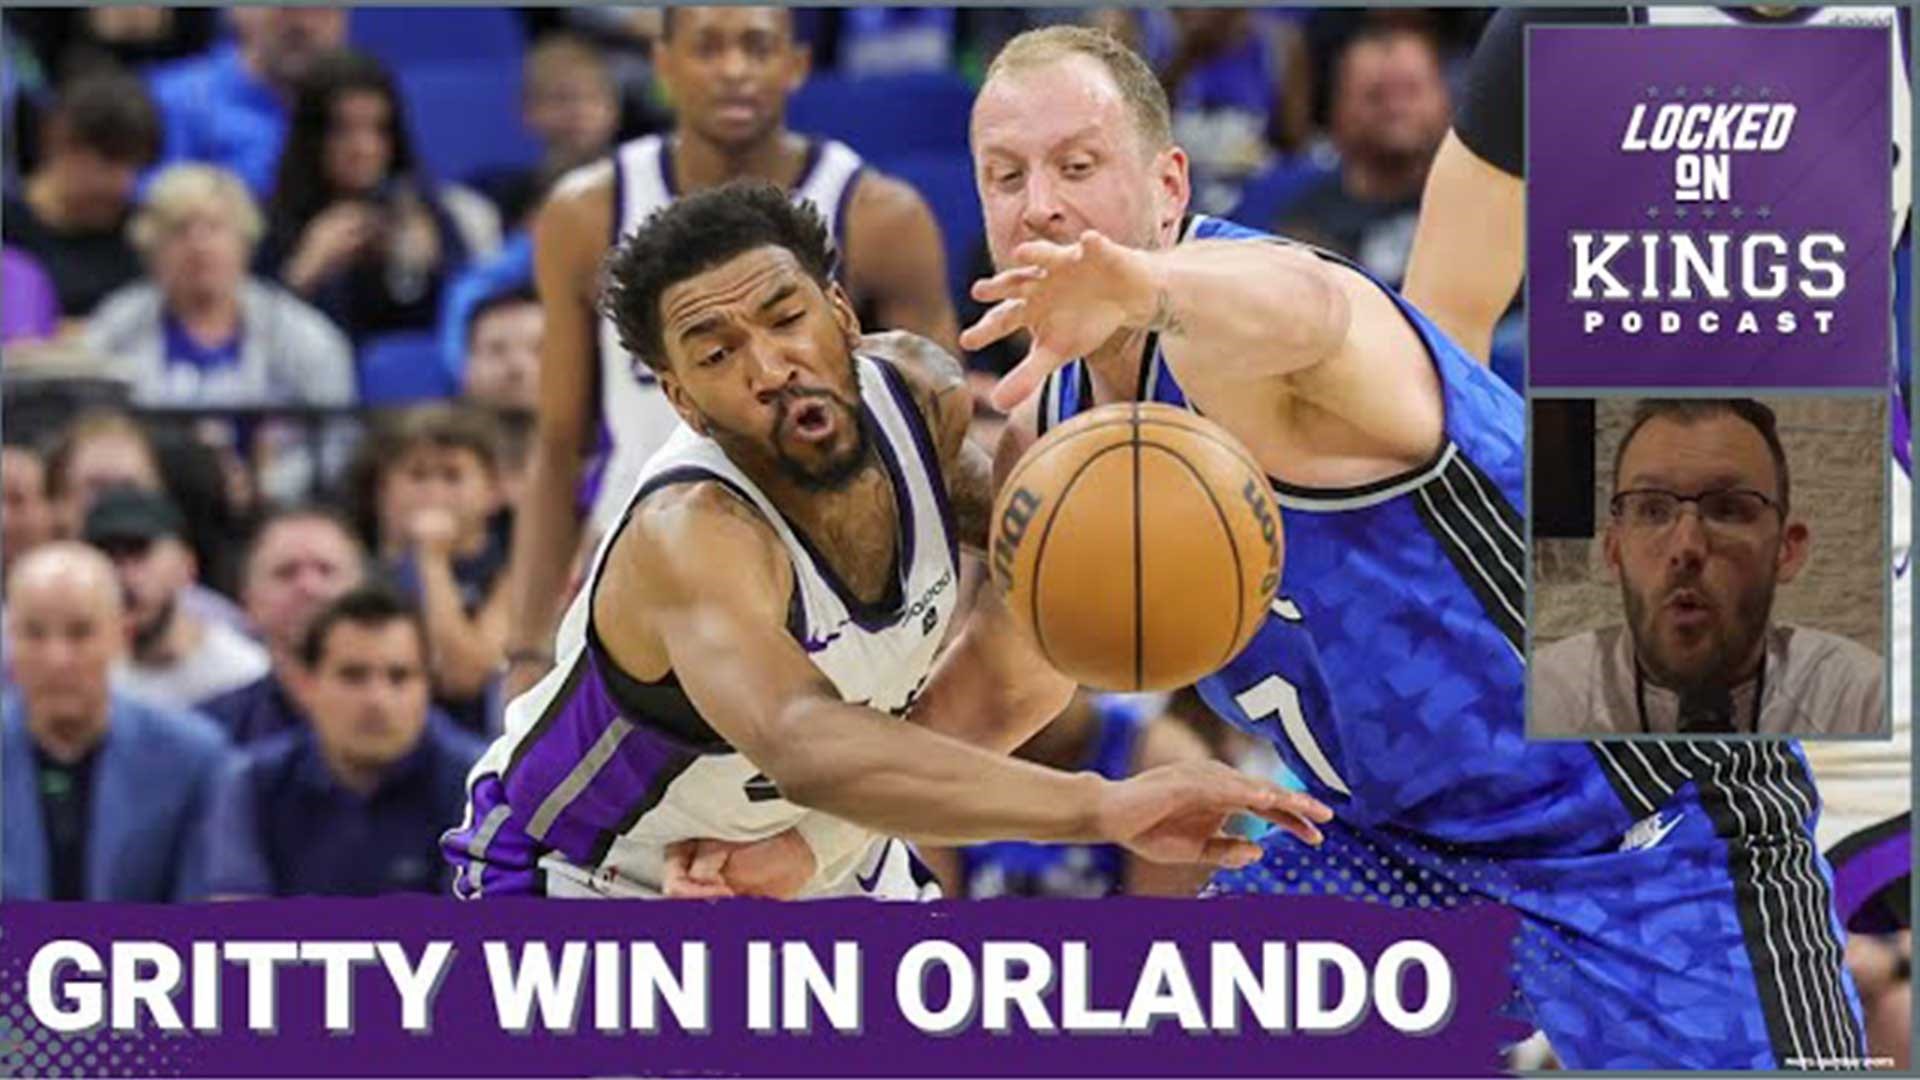 Matt George breaks down the Sacramento Kings' crucial bounce-back victory in Orlando, where the defense continued its recent run of success.